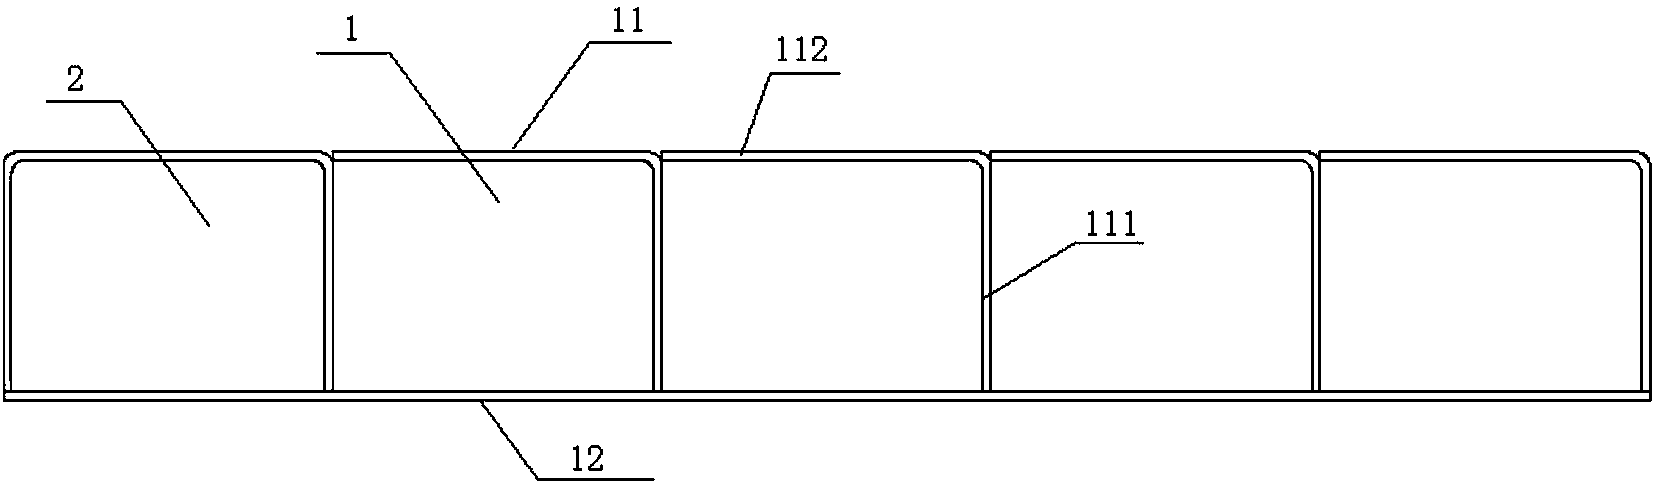 Steel tube bundle combined structure consisting of steel plates and L-shaped steel